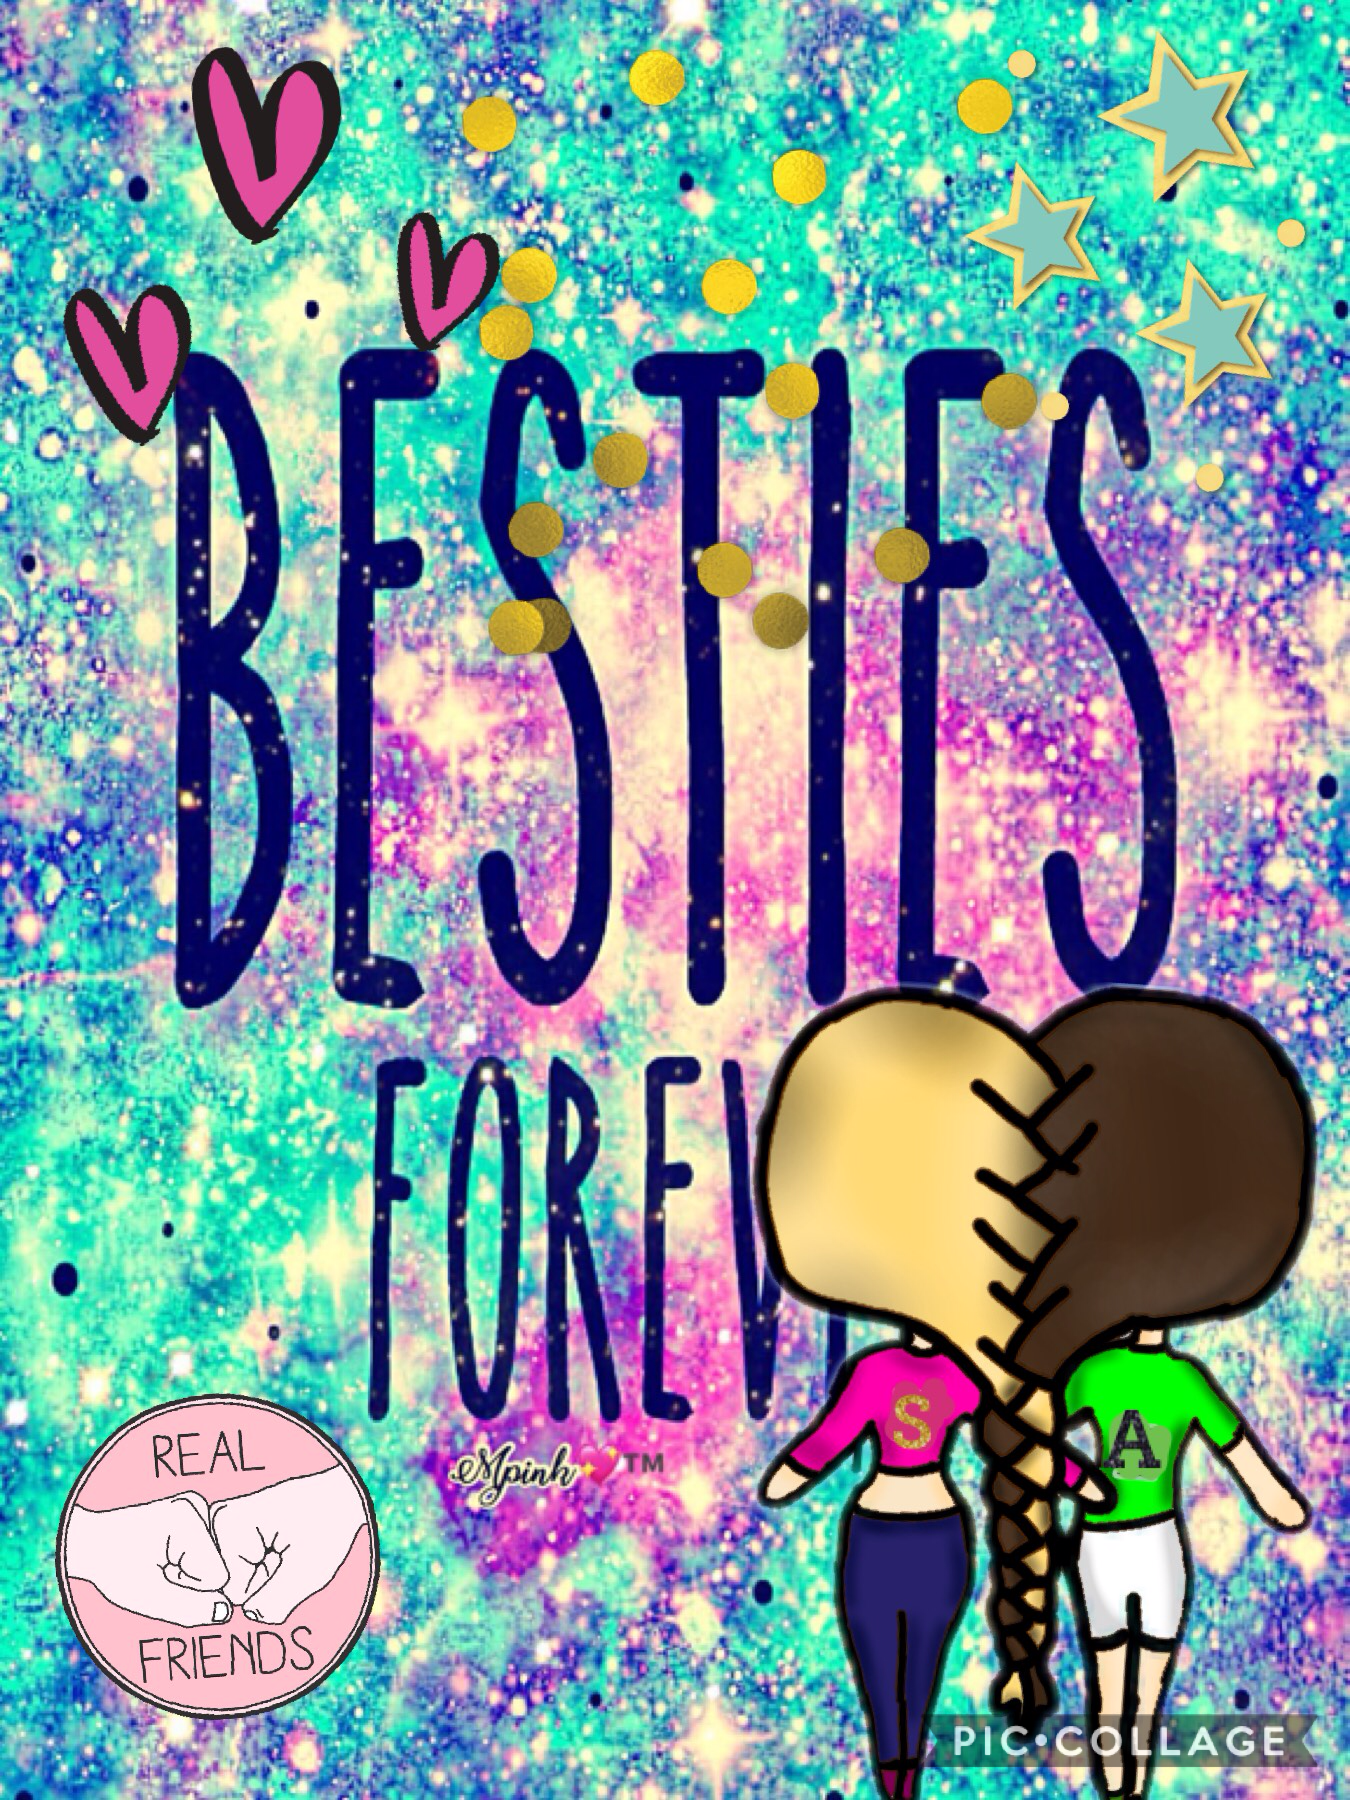 I made this for me and my bff